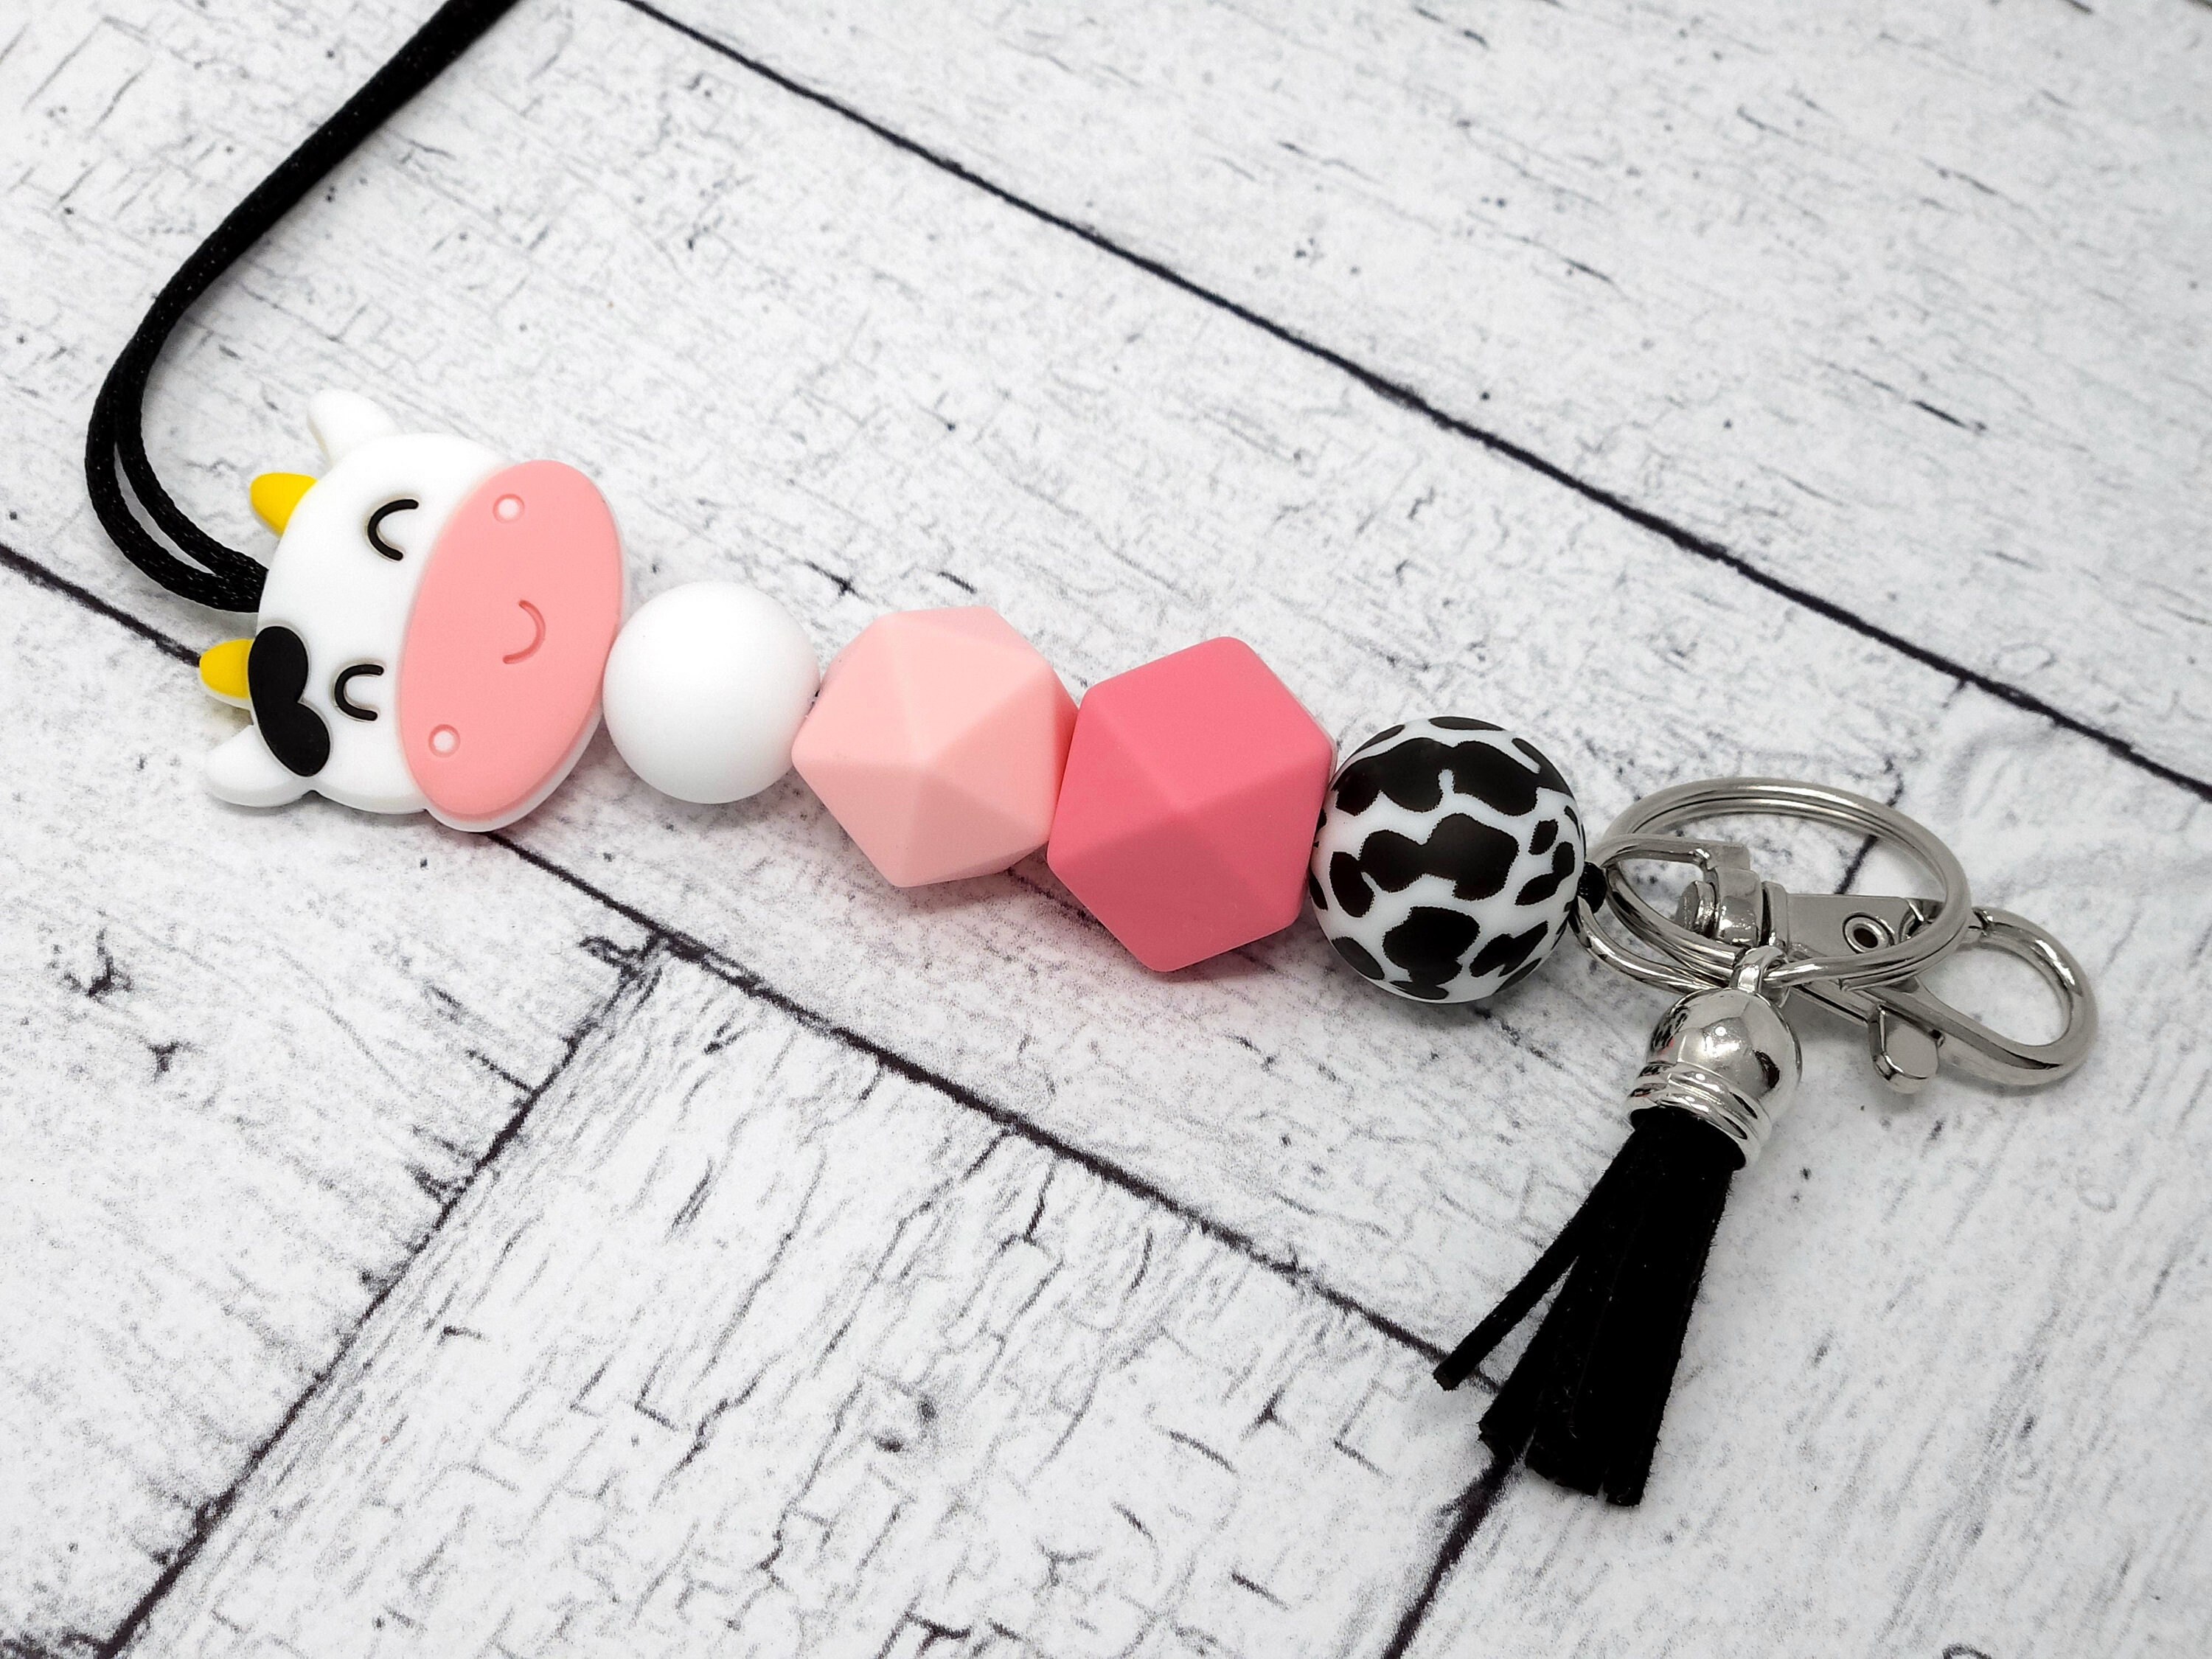 Highland Cow Silicone Bead Keychain – Lilly Jayne Collective